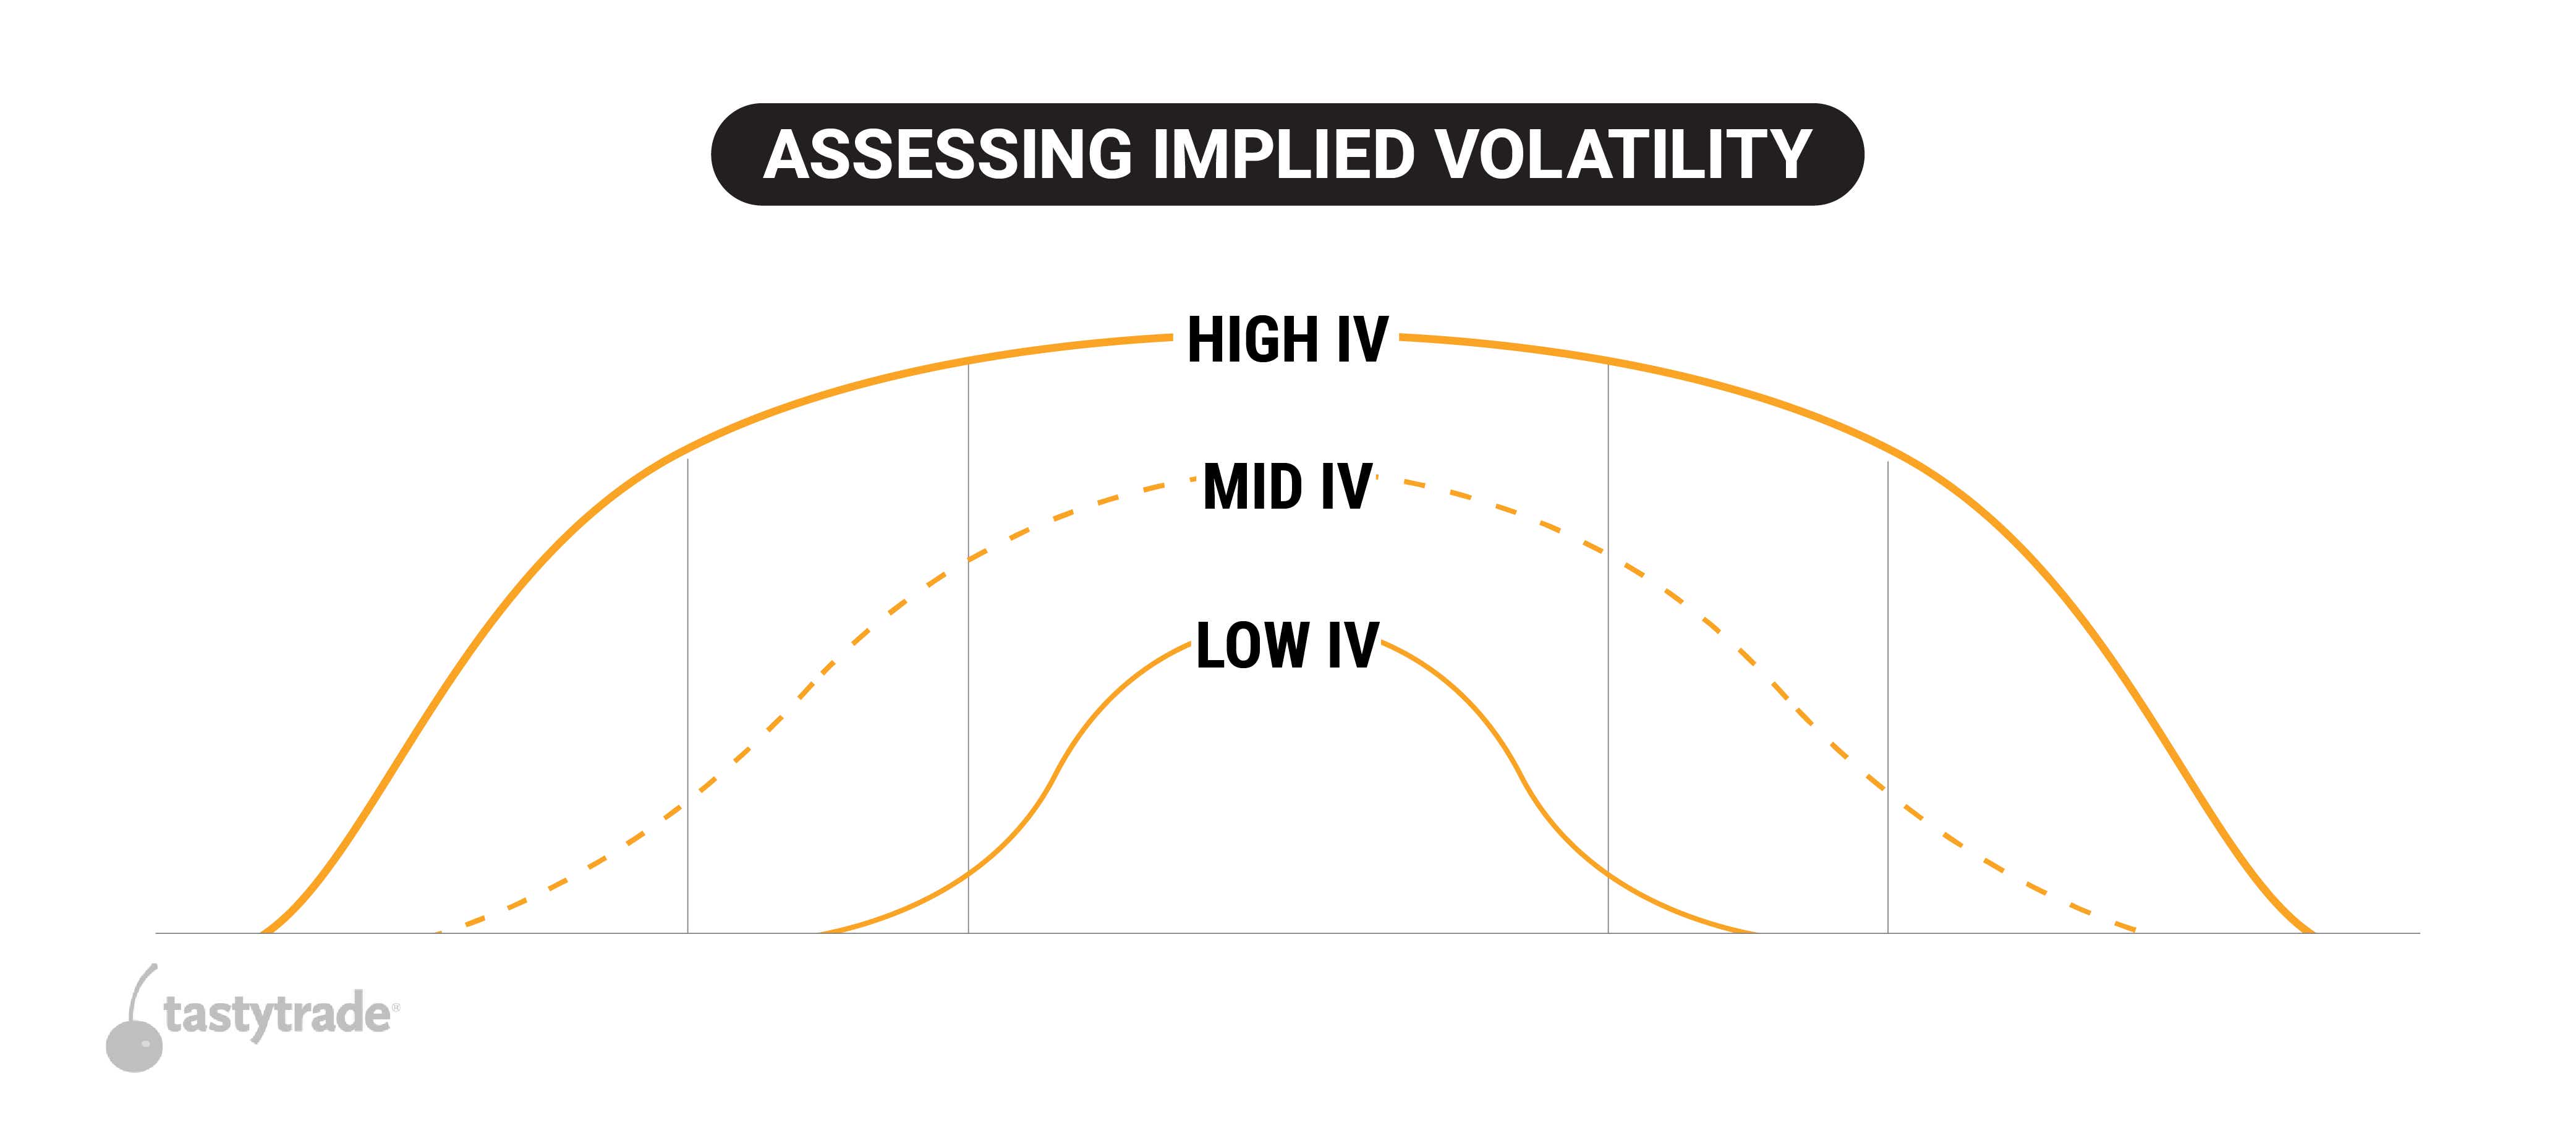 Assessing implied volatility bell curve